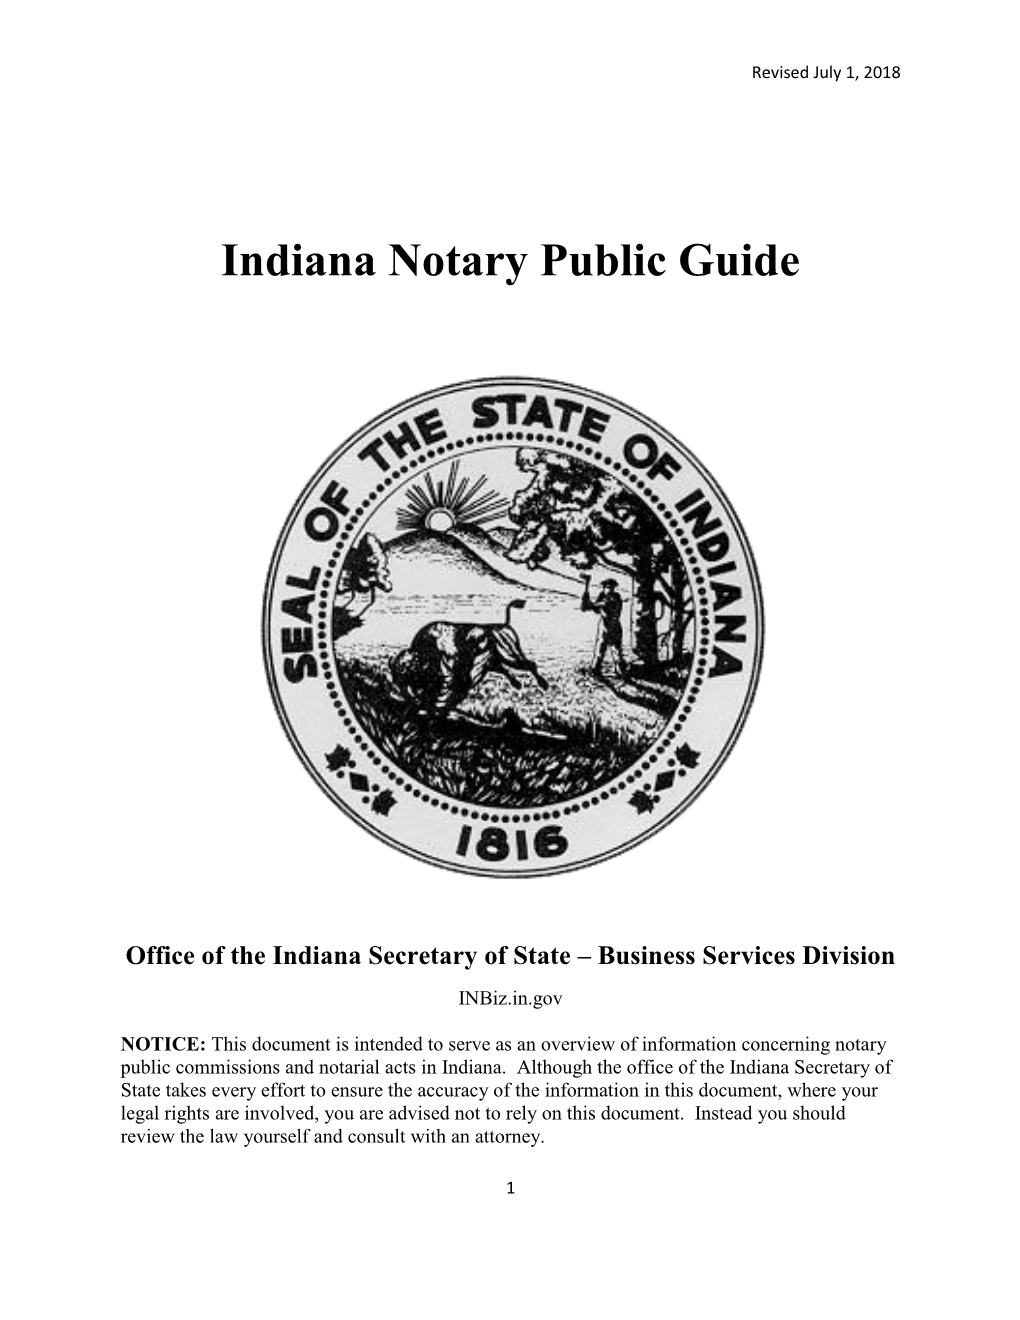 Indiana Notary Public Guide